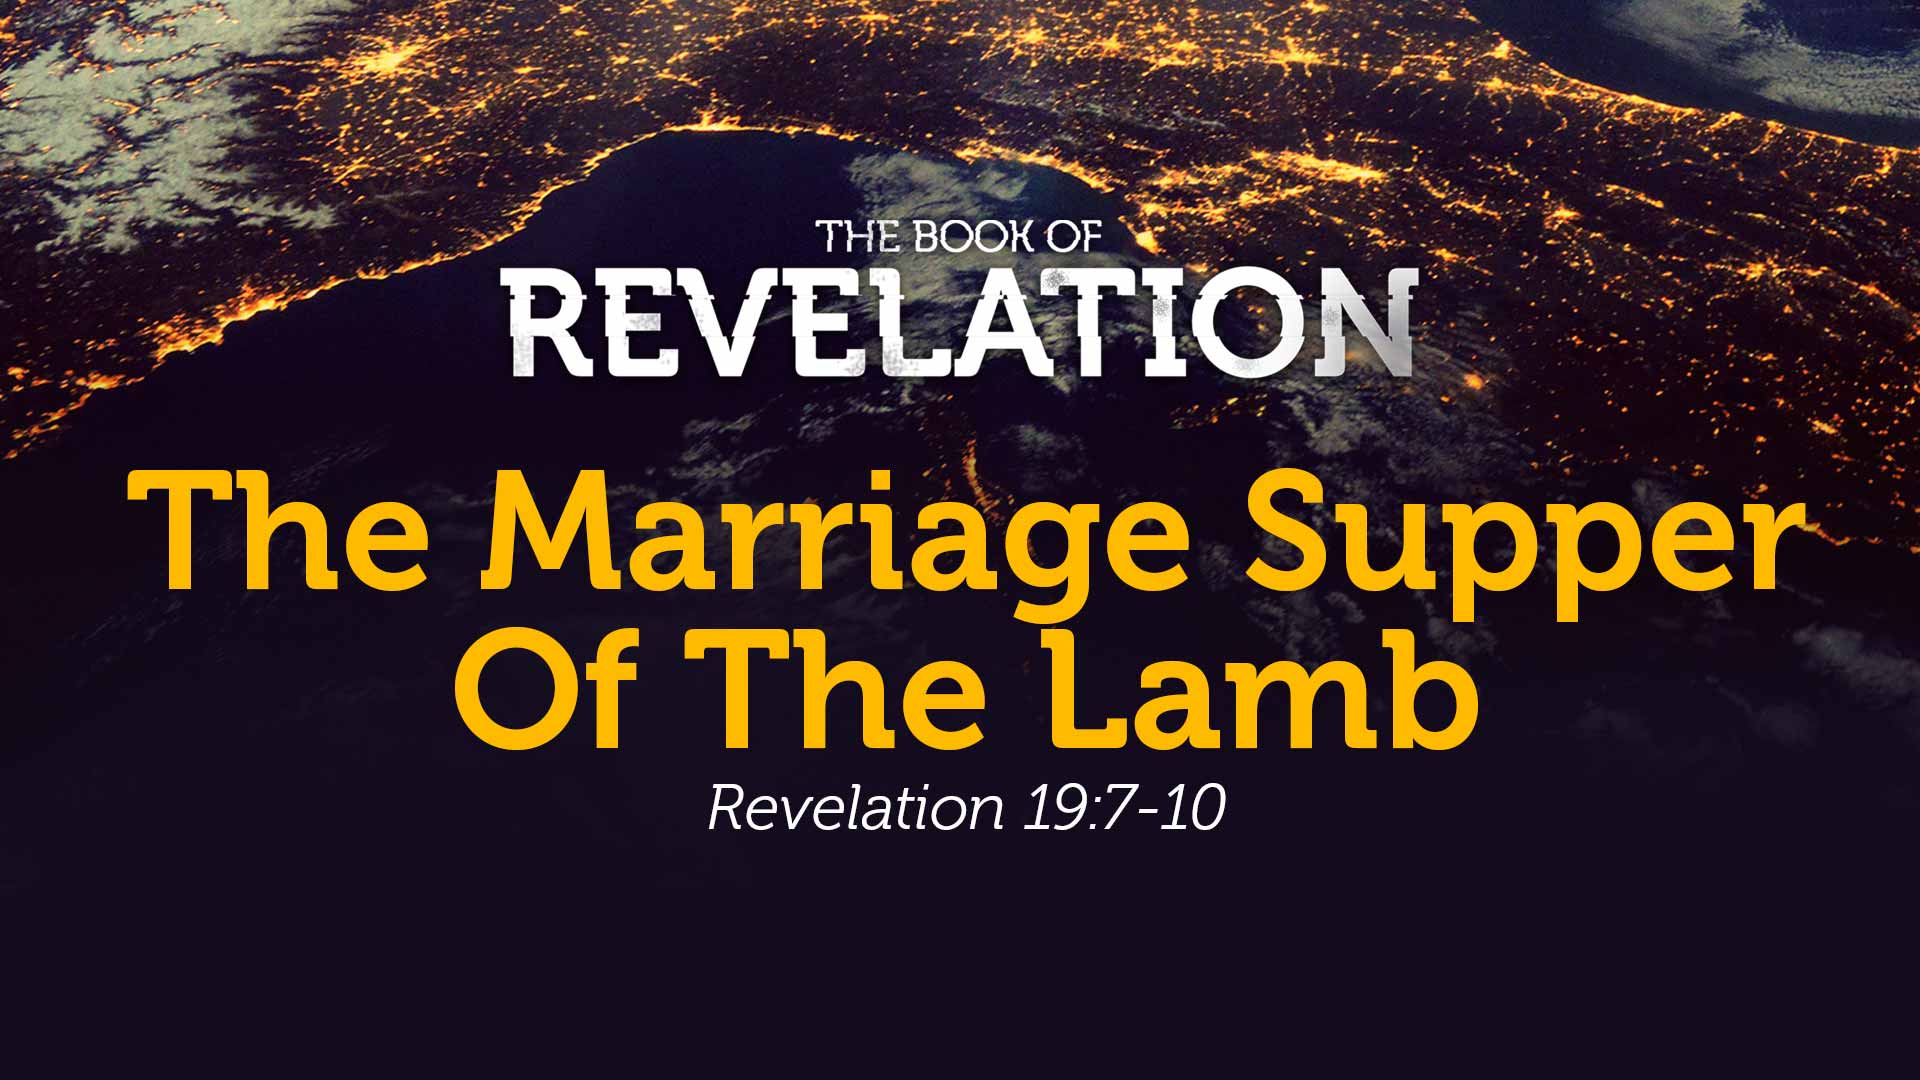 The Marriage Supper Of The Lamb - REV054 | Sermons | Search the Scriptures